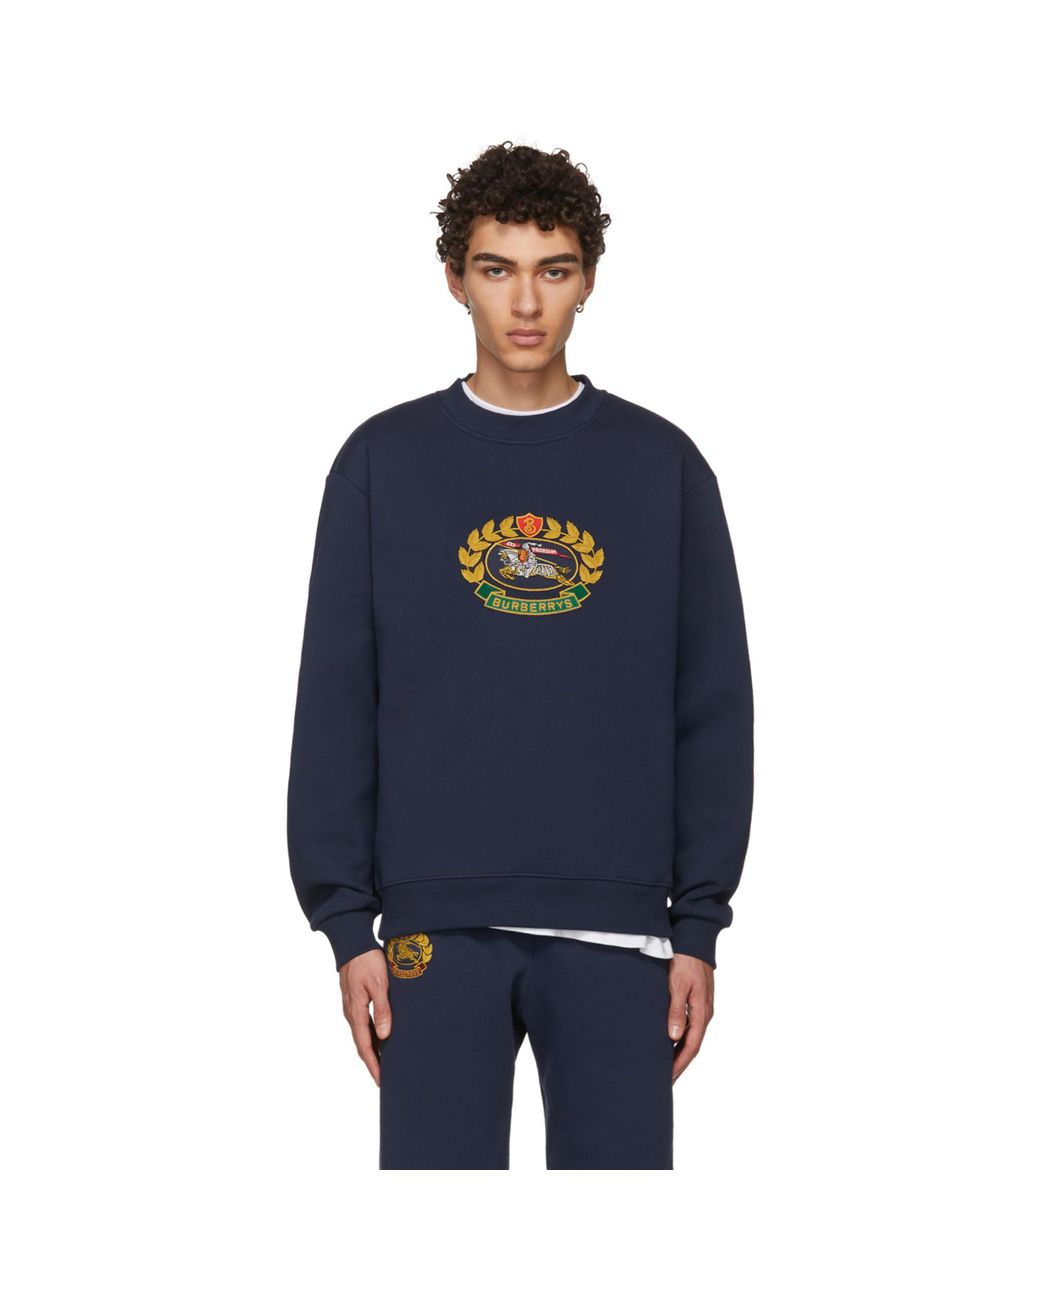 burberry crest hoodie - OFF-60% > Shipping free